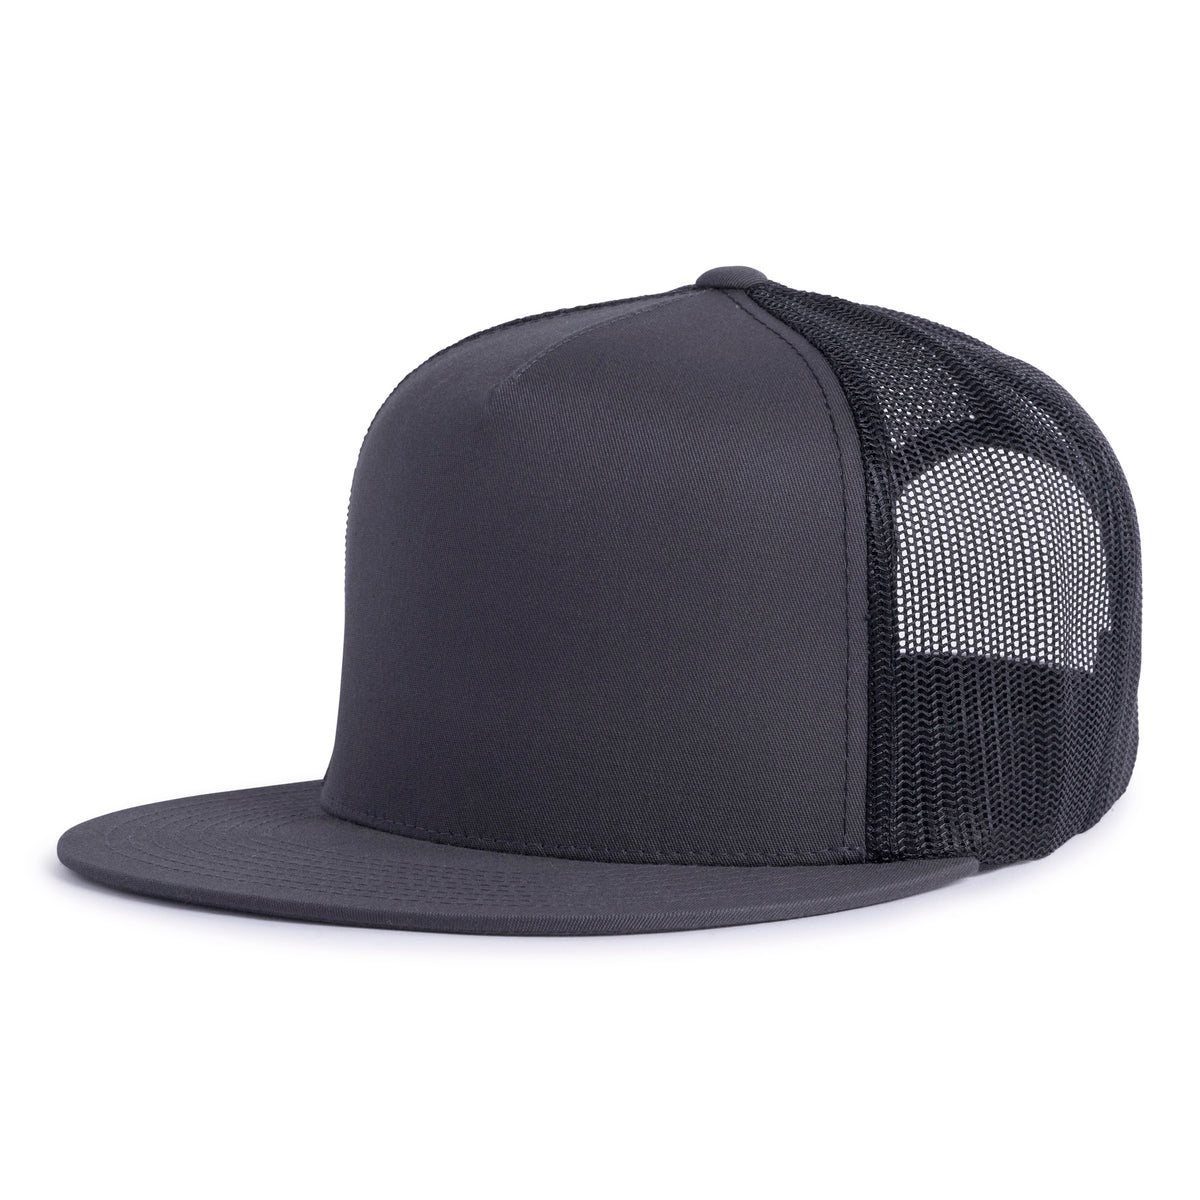 Classic charcoal grey trucker hat with a flat bill, 5-panels, structured high crown, black mesh back, and a snapback closure from Tailgate Hats.